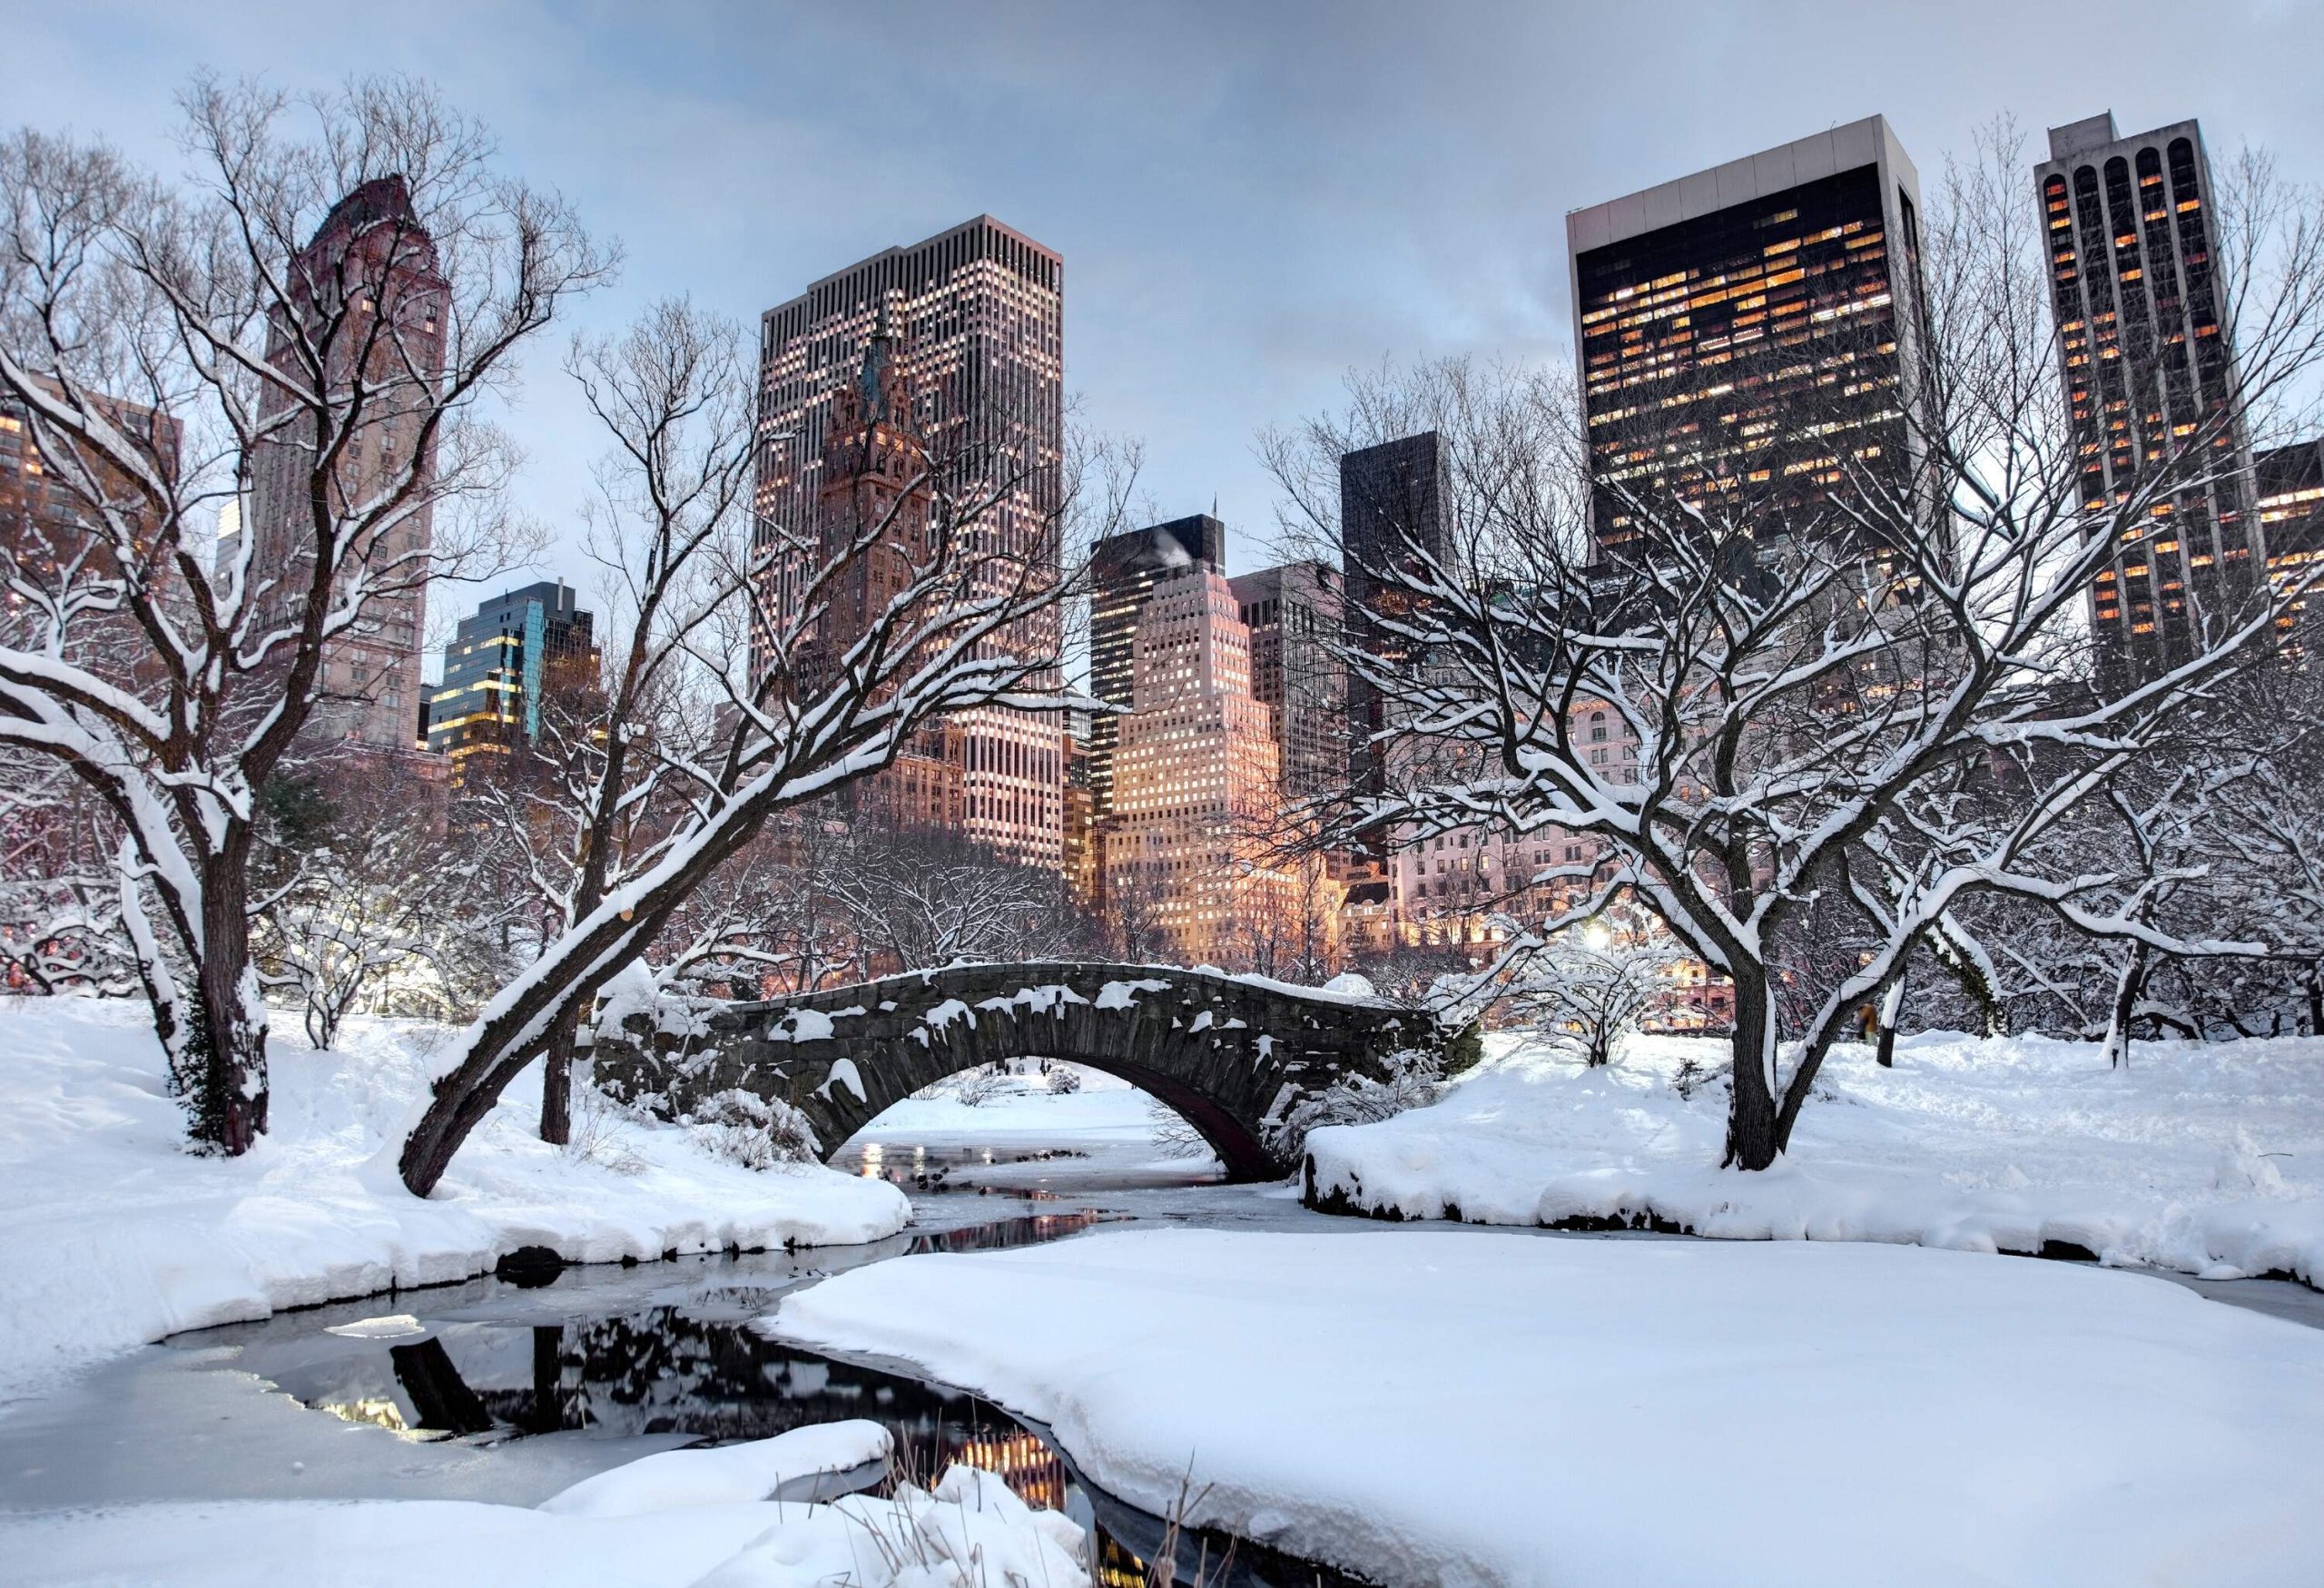 A stone arch bridge across a pond in a snow-covered park with bare trees and views of a city skyline in the background.